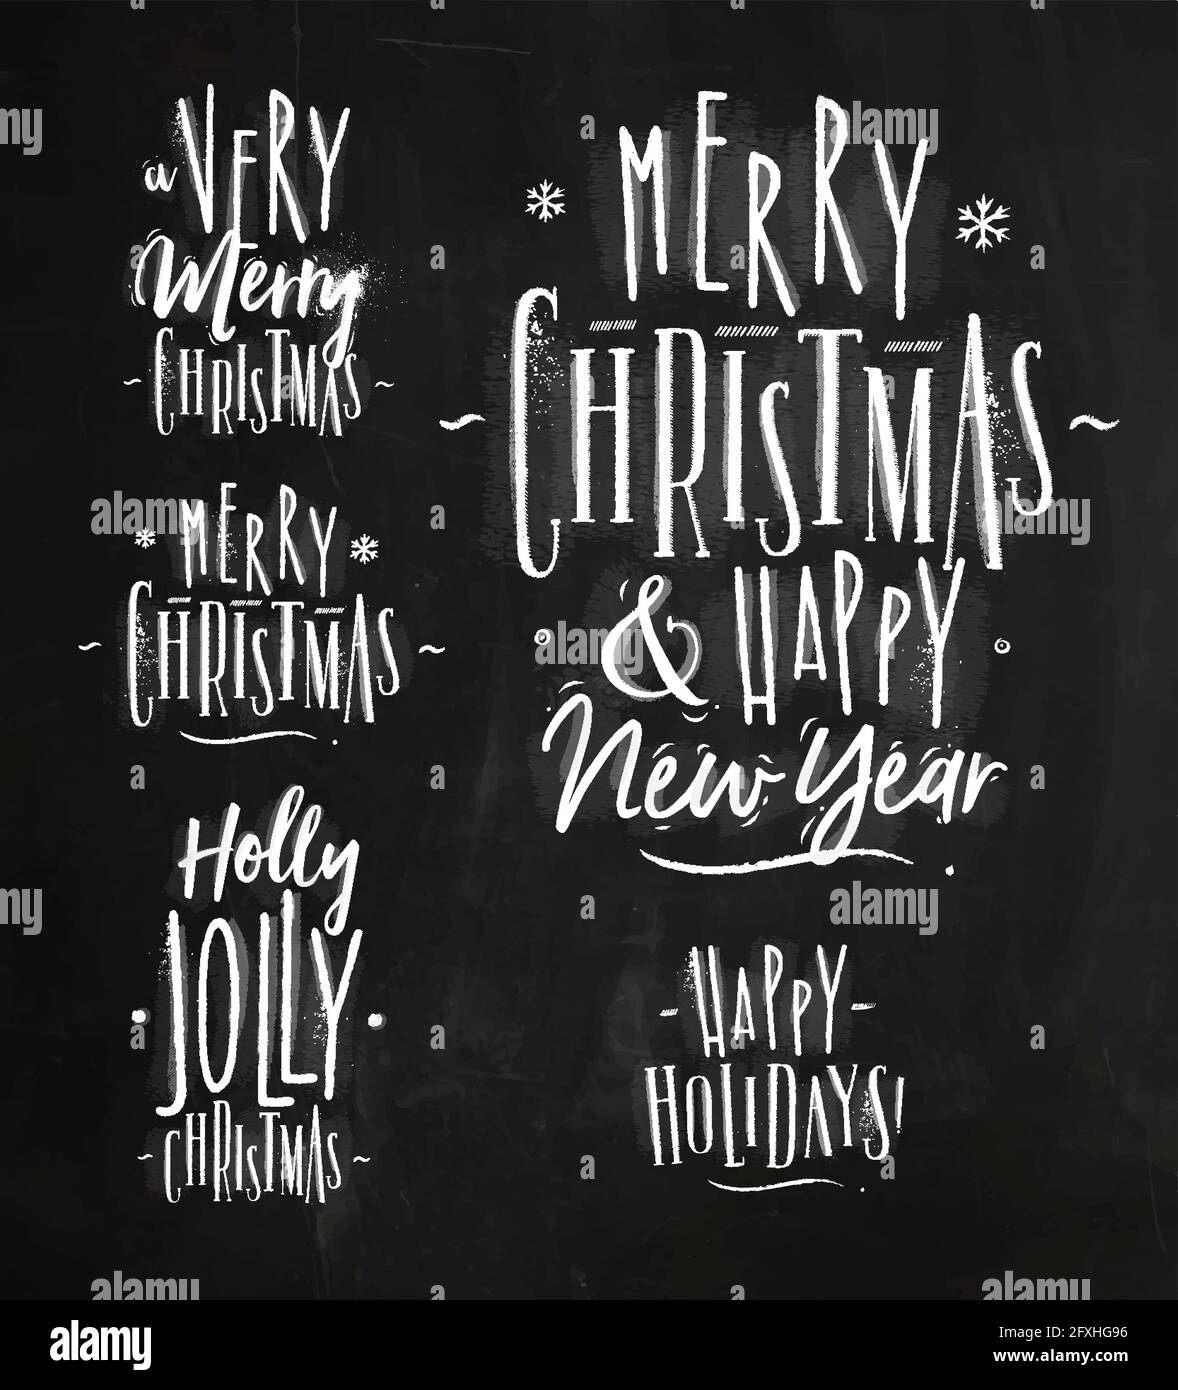 Chrictmas lettering graphic a very merry christmas and happy new year, holly jolly christmas, happy holidays drawing in retro style on chalkboard Stock Vector